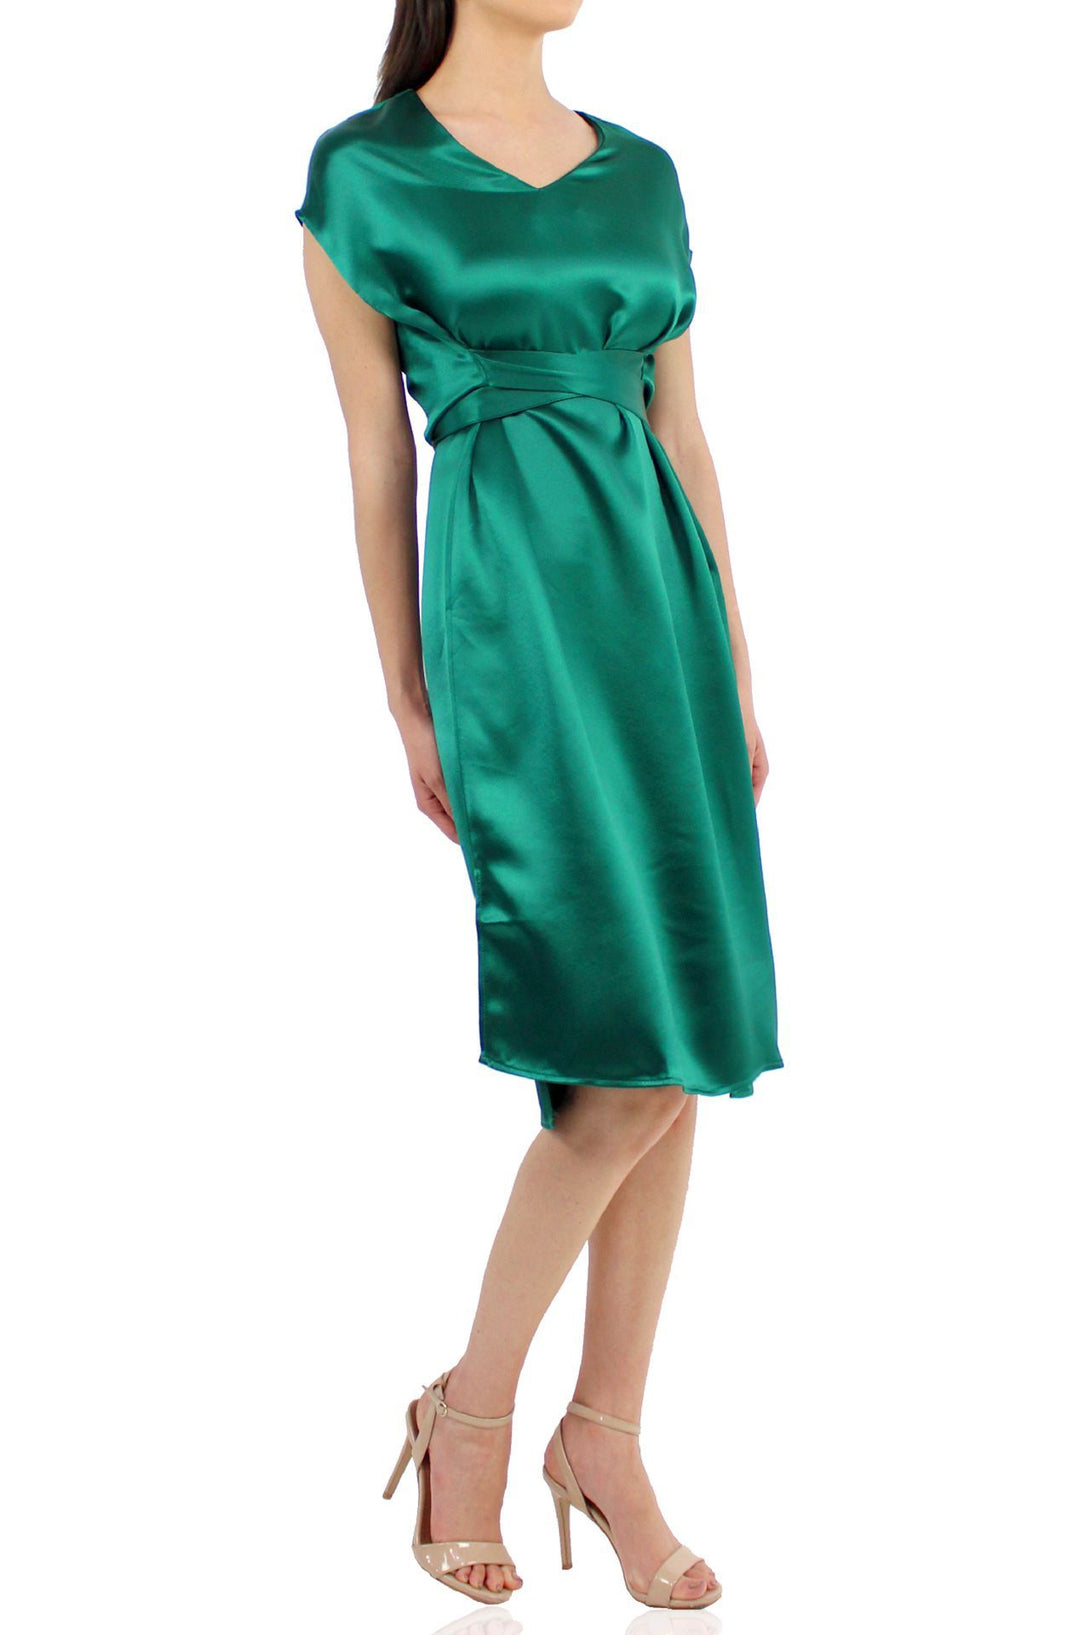 Belted-Mini-Dress-For-Womens-In-Green-By-kyle-Richard